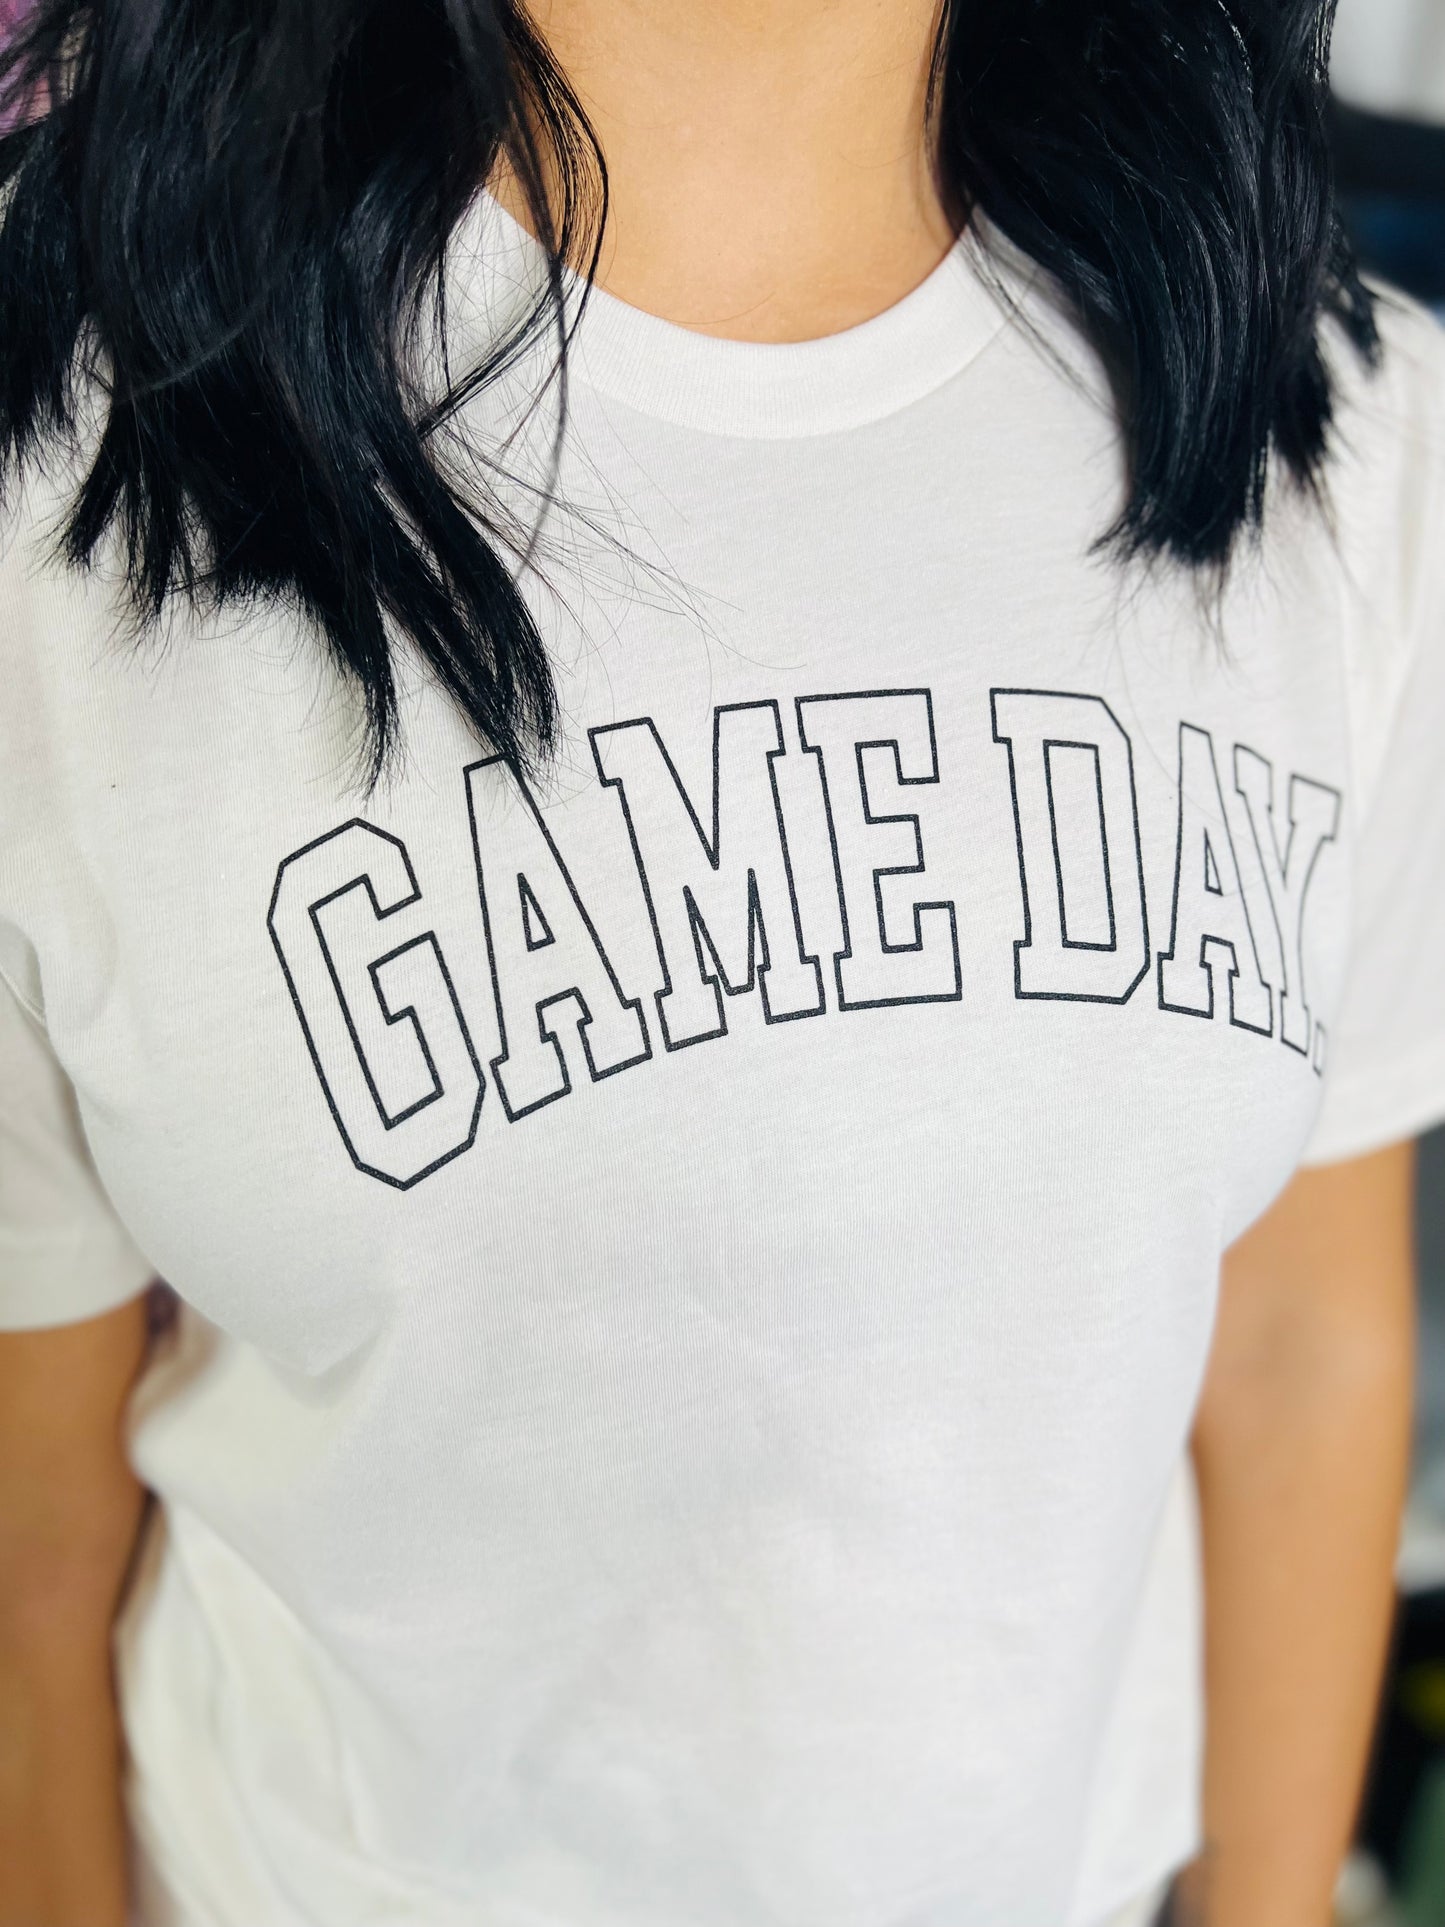 The Gameday Tee